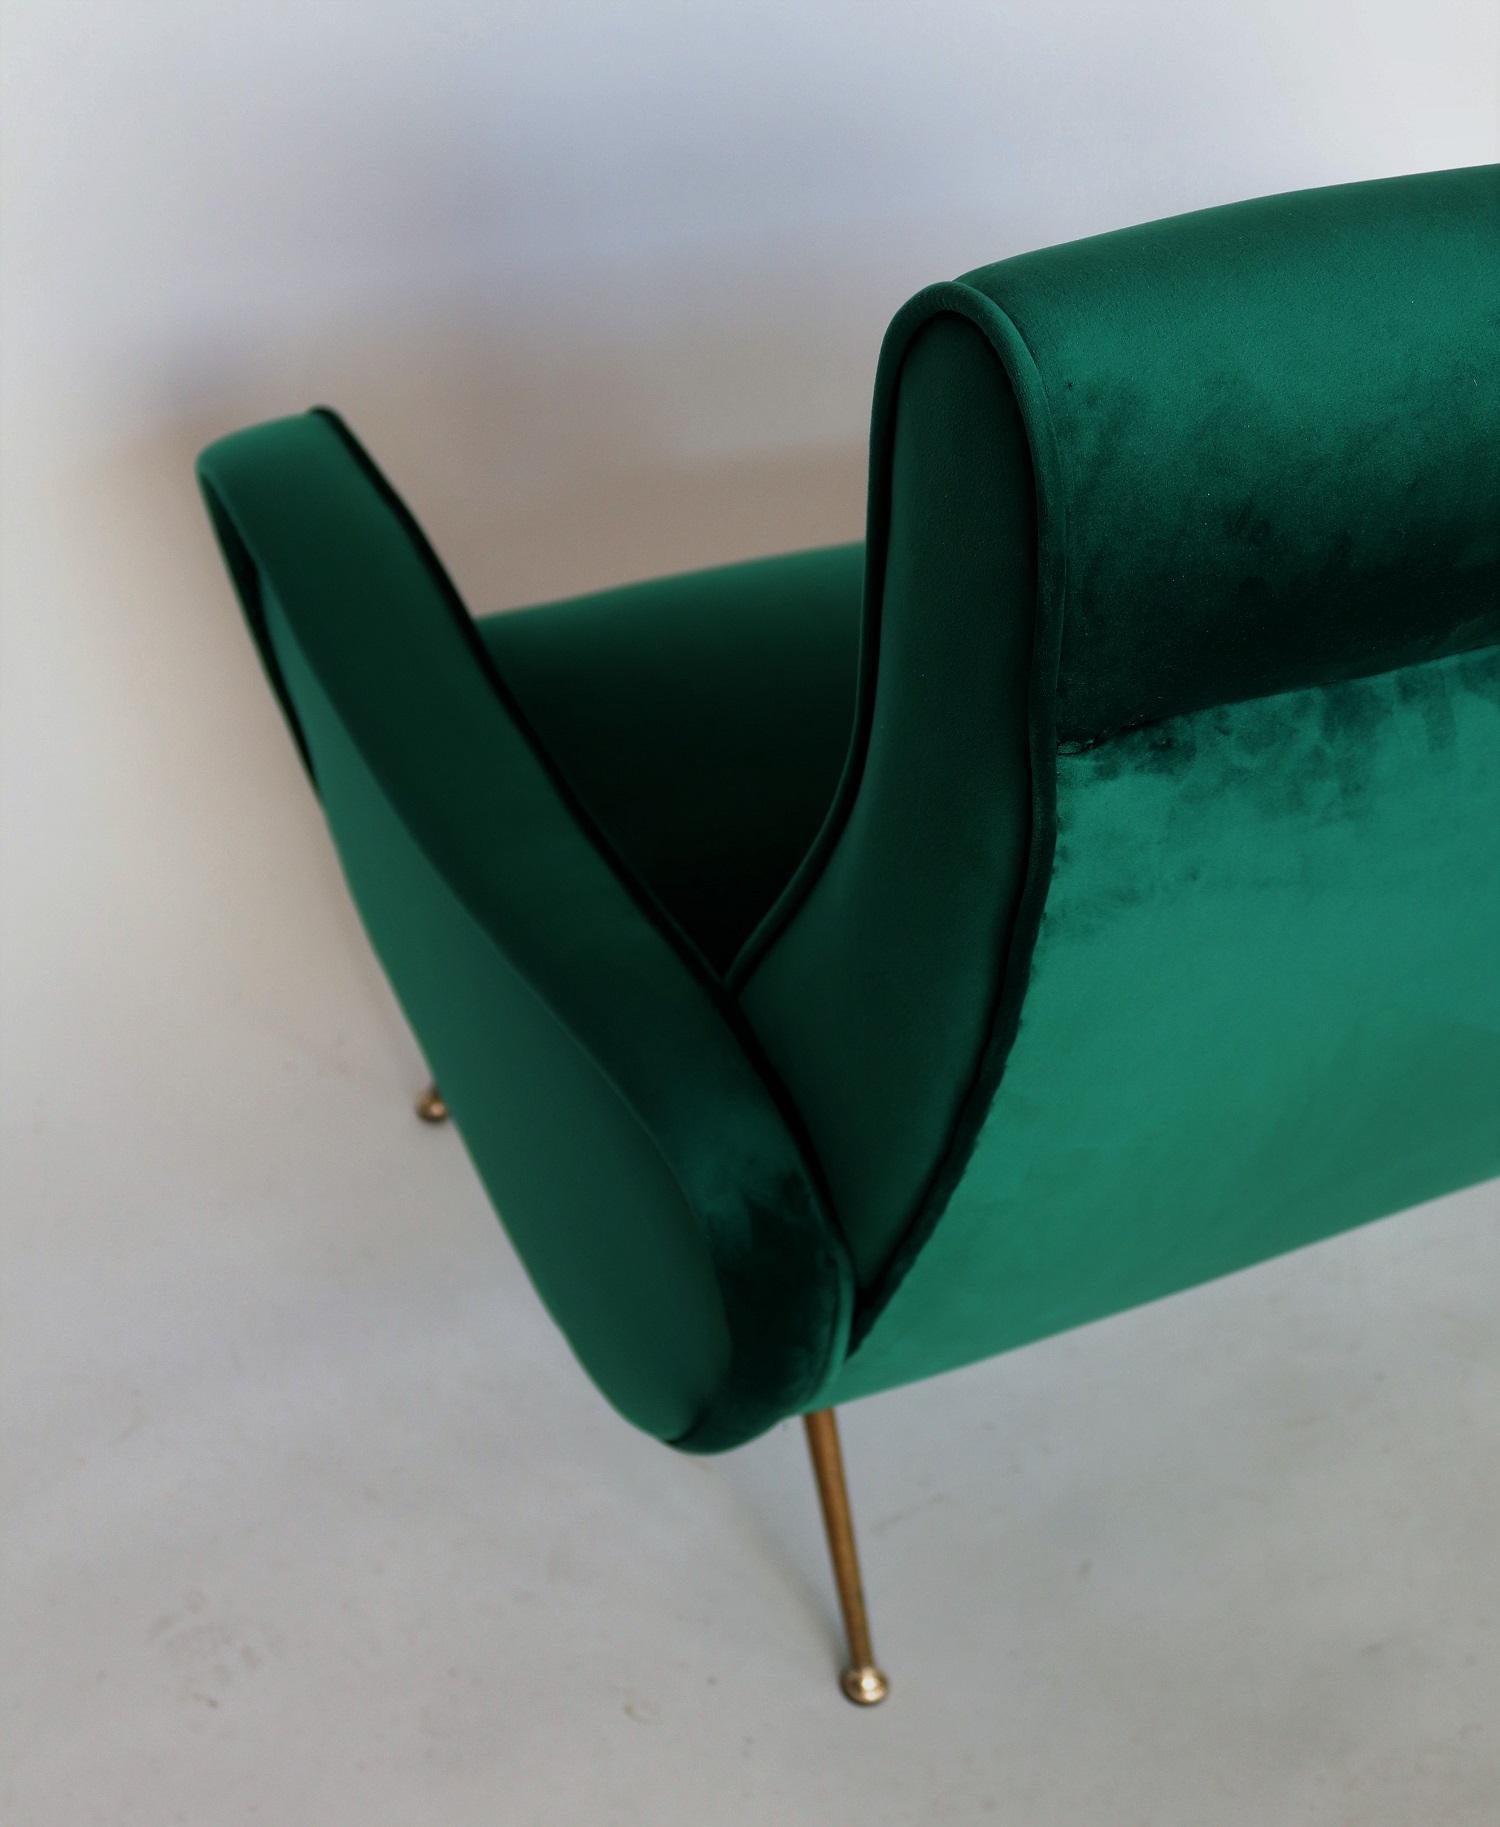 Italian Midcentury Sofa or Settee in New Green Velvet and Brass Tipps, 1950s In Good Condition For Sale In Morazzone, Varese